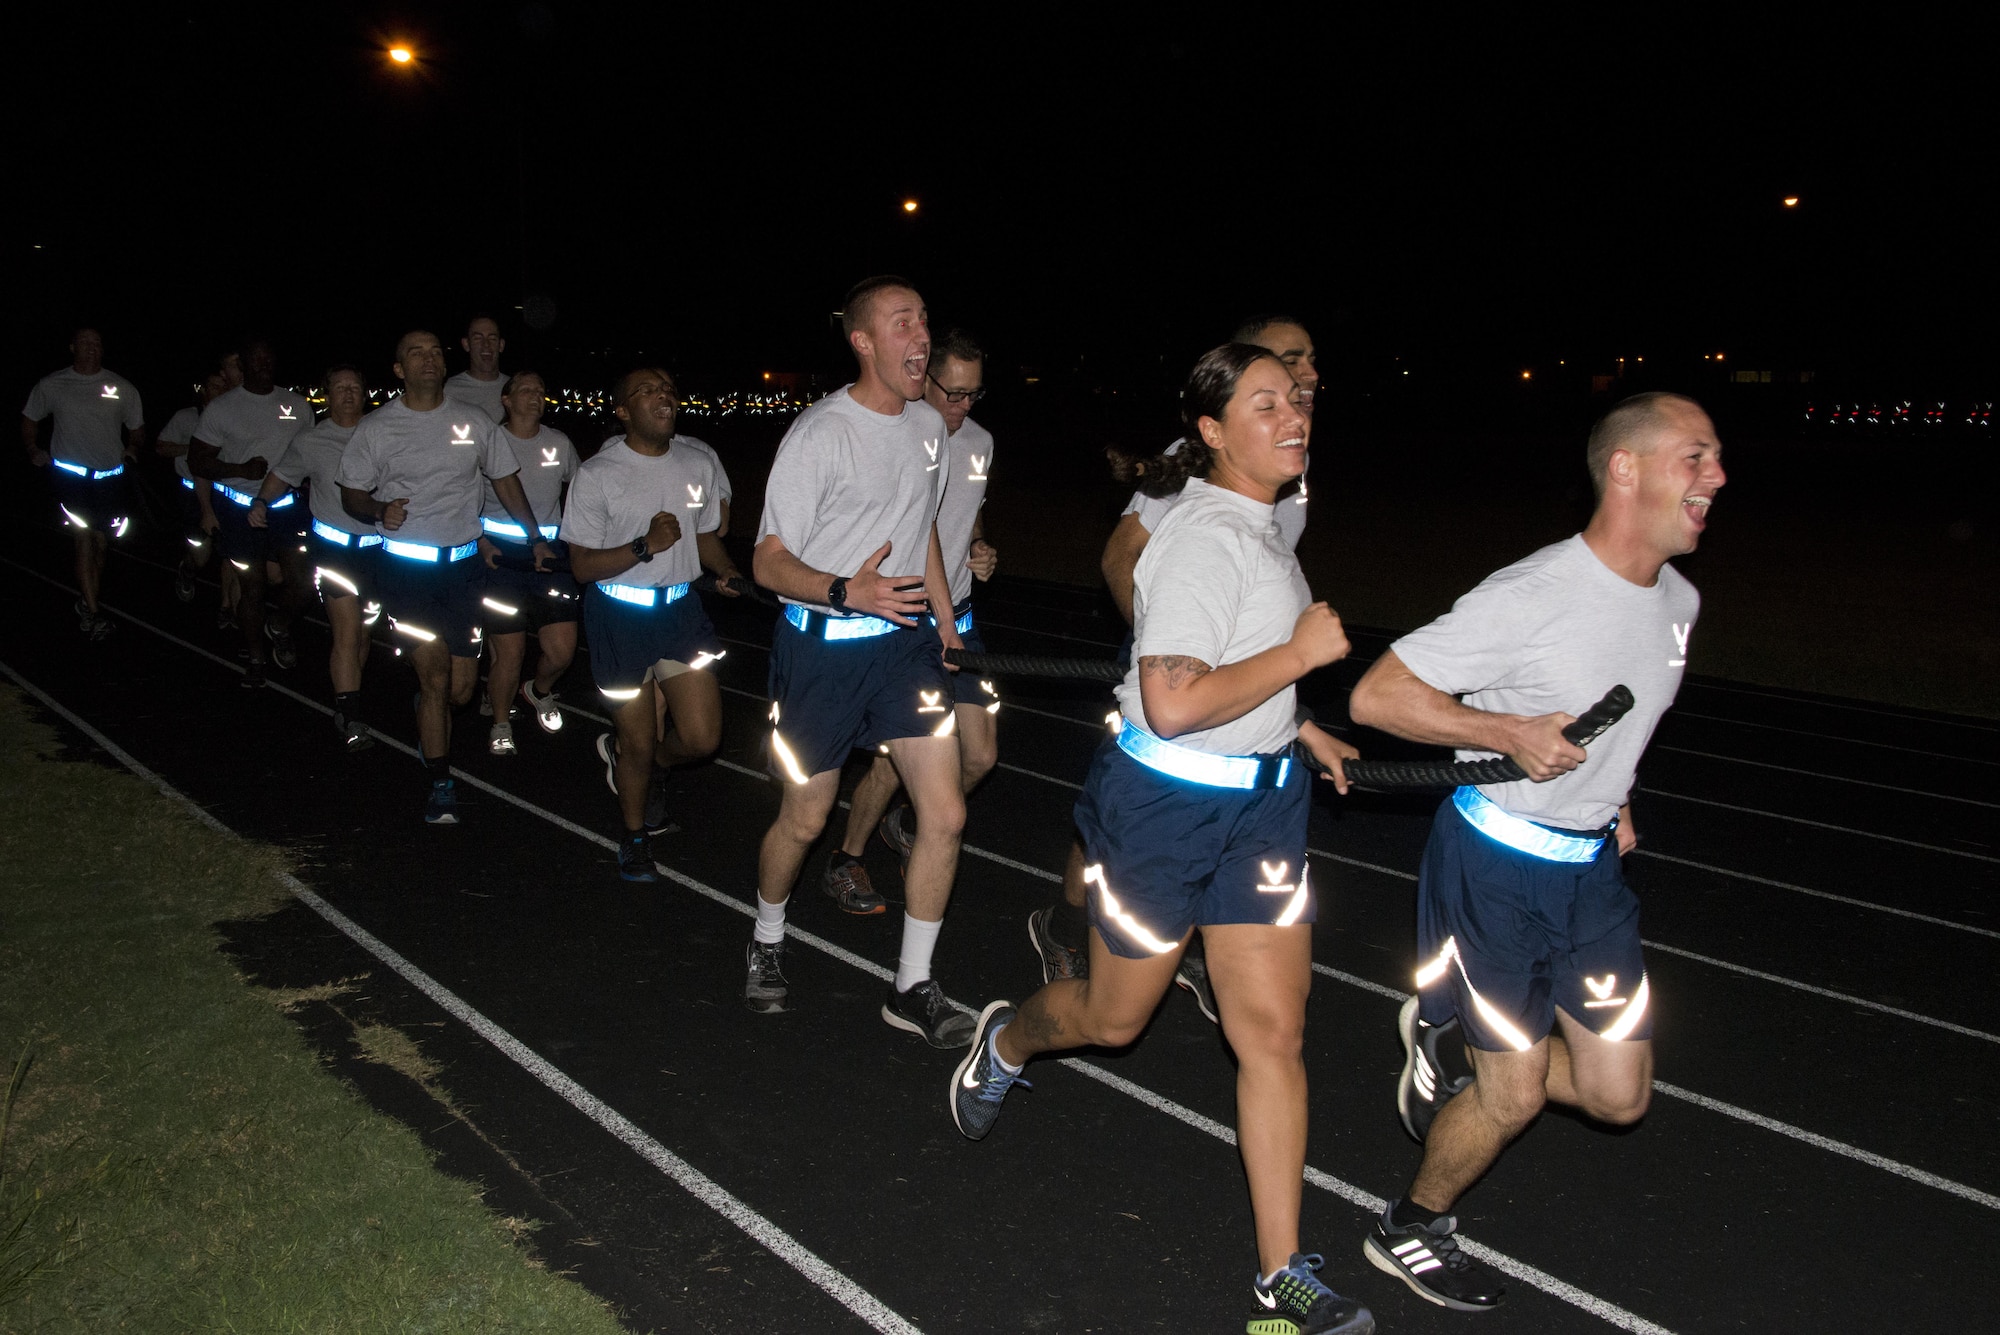 Officer Training School Cadets run during a physical training session at Maxwell Air Force Base, Sept. 30, 2016. Air Force has directed a service-wide recertification of all installation 1.5-mile run and 2-kilometer walk courses by Oct. 31. Oct. 6, 2016. This includes all three of Maxwell's testing sites. (U.S. Air Force photo by Senior Airman William Blankenship)